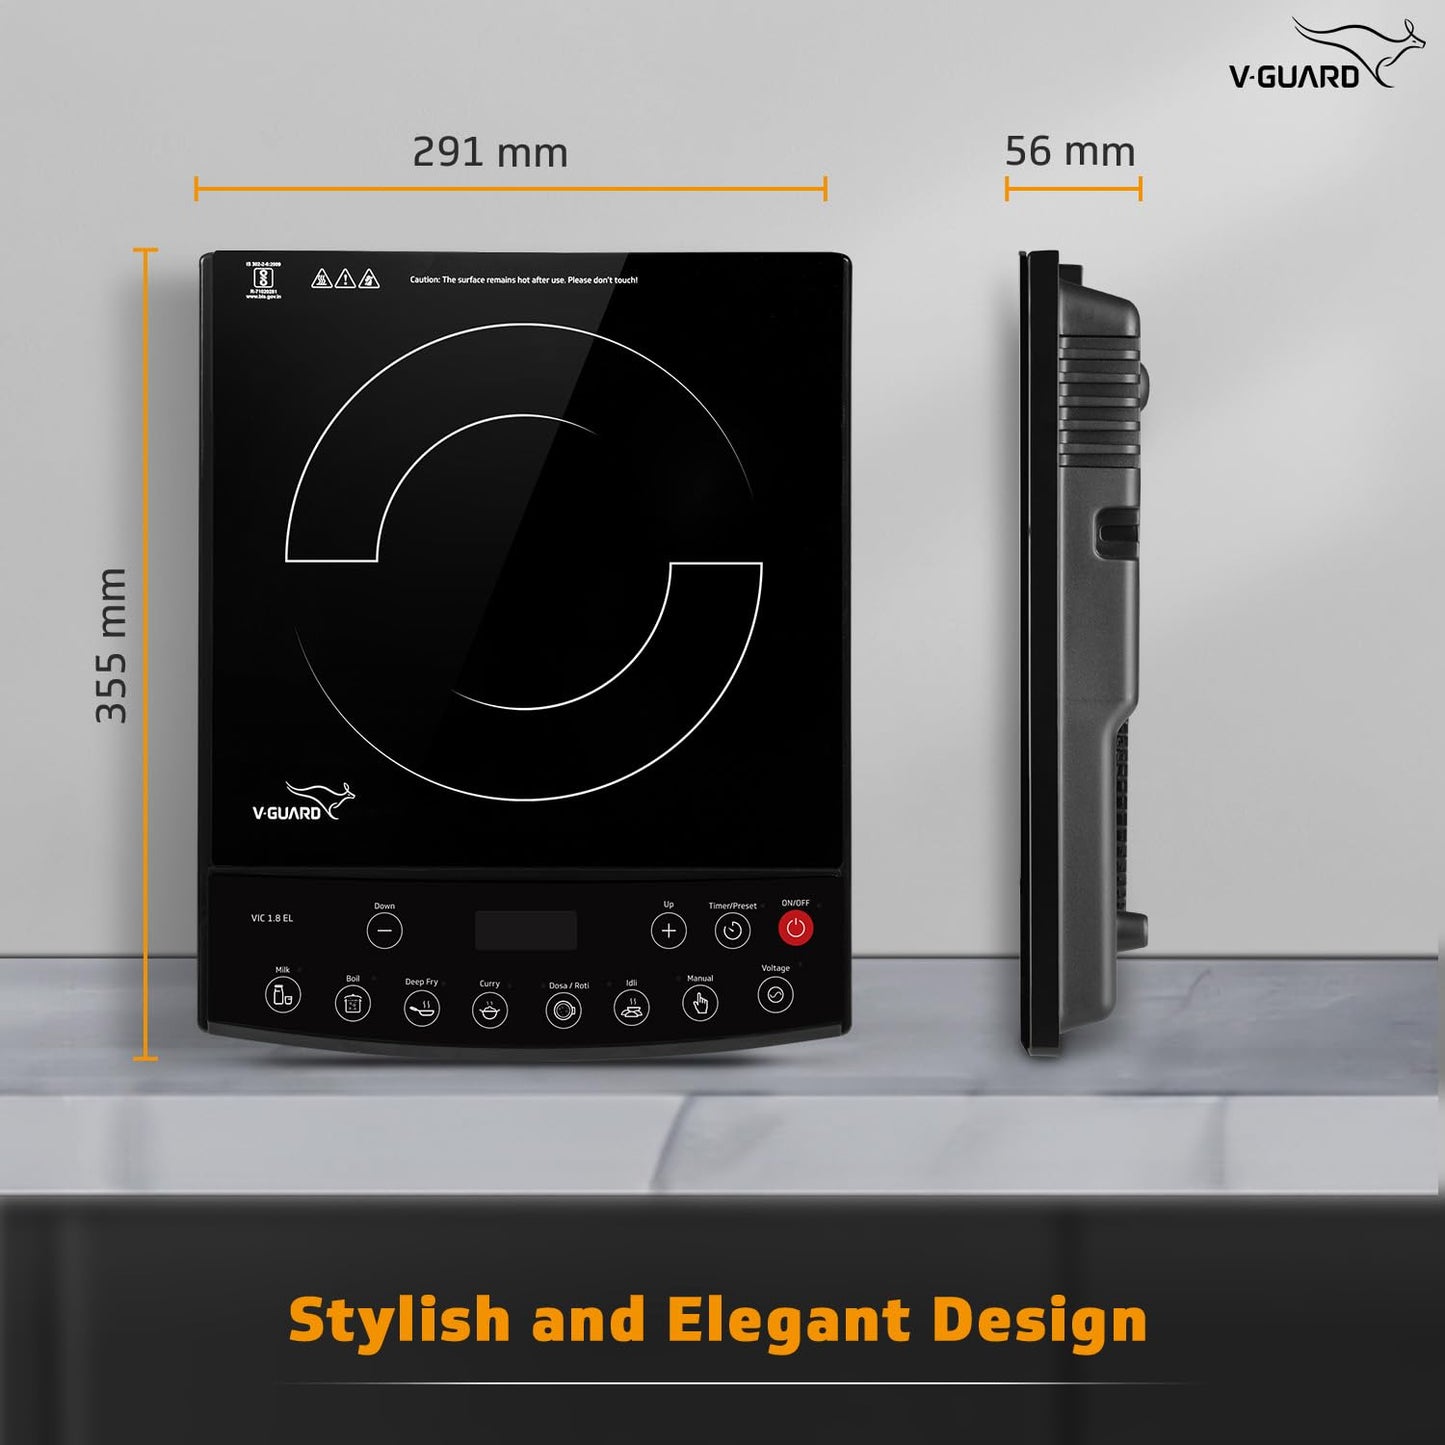 VIC 1.8 EL Induction Cooktop / 1800 Watt Electric Induction stove with 8 Power Levels |Temperature Control | Push button| Auto-cutoff | Elegant Crystal Glass Matte Finish | Fast Cooking